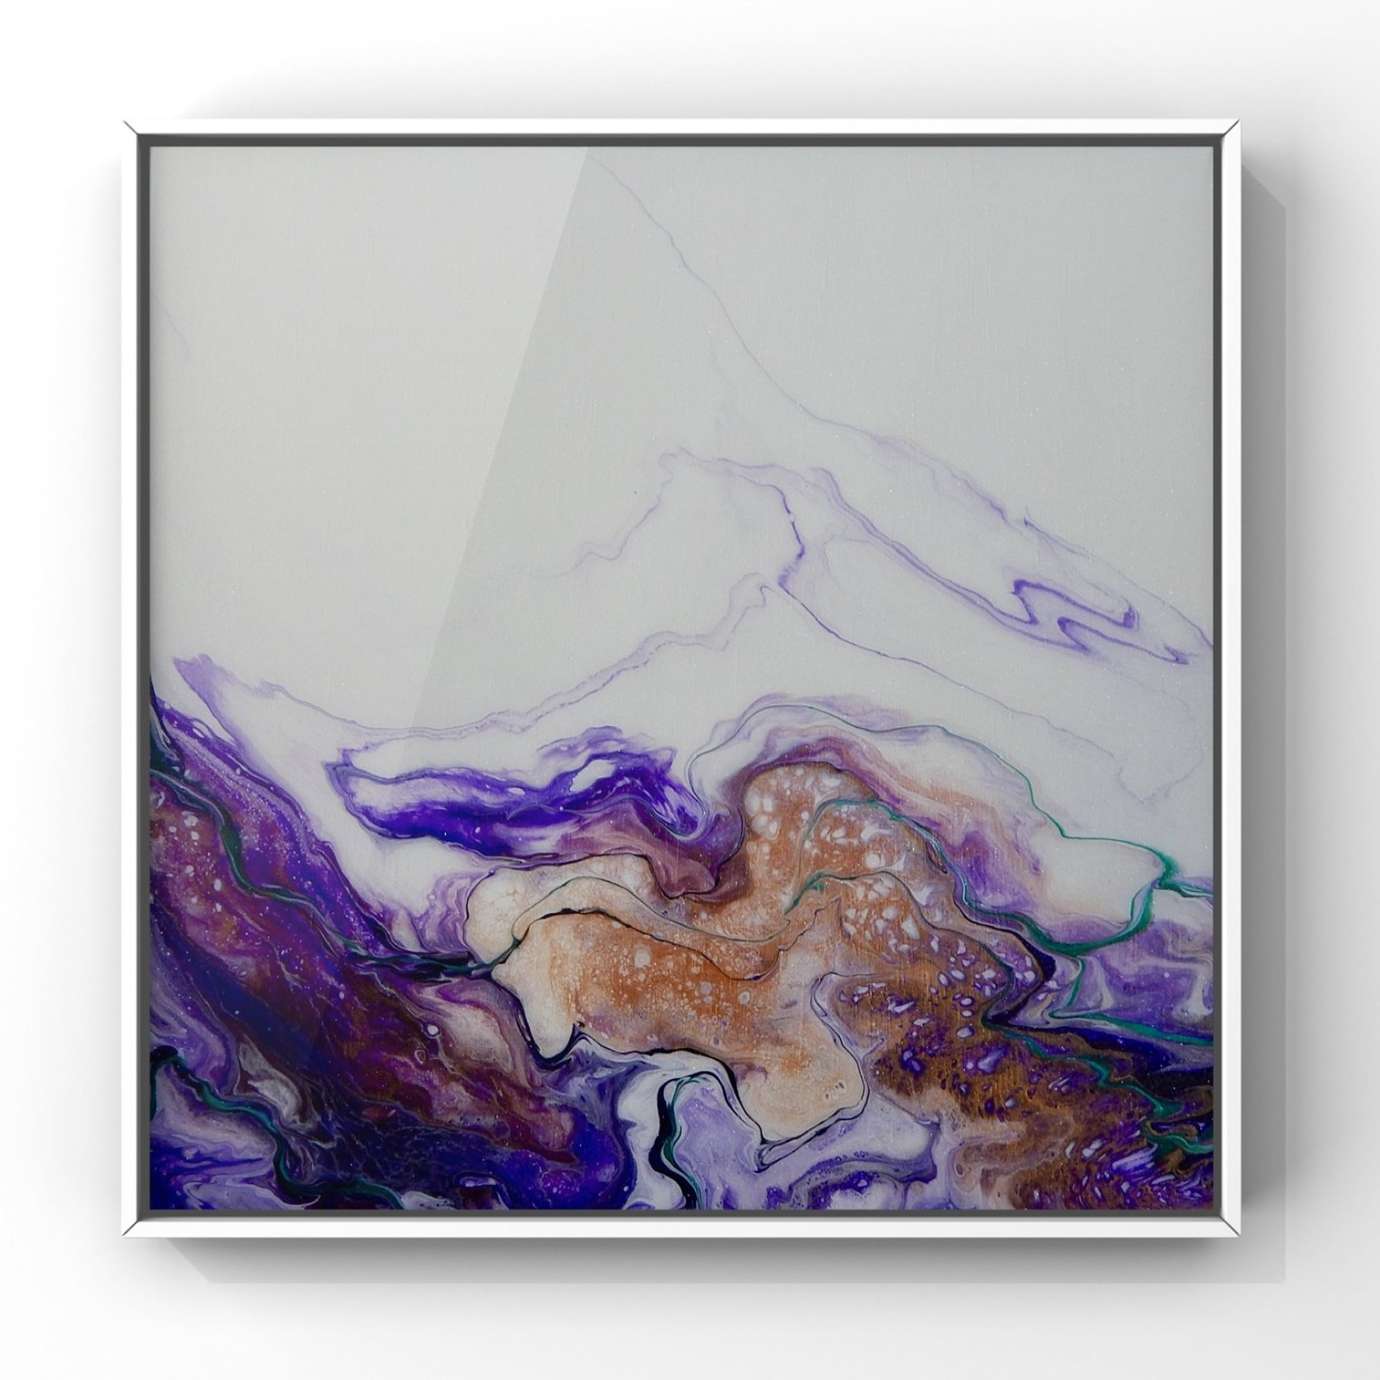 A painting with swirled strokes of purple and gold paint, resin, and fairy dust by artist Kai Des Etages